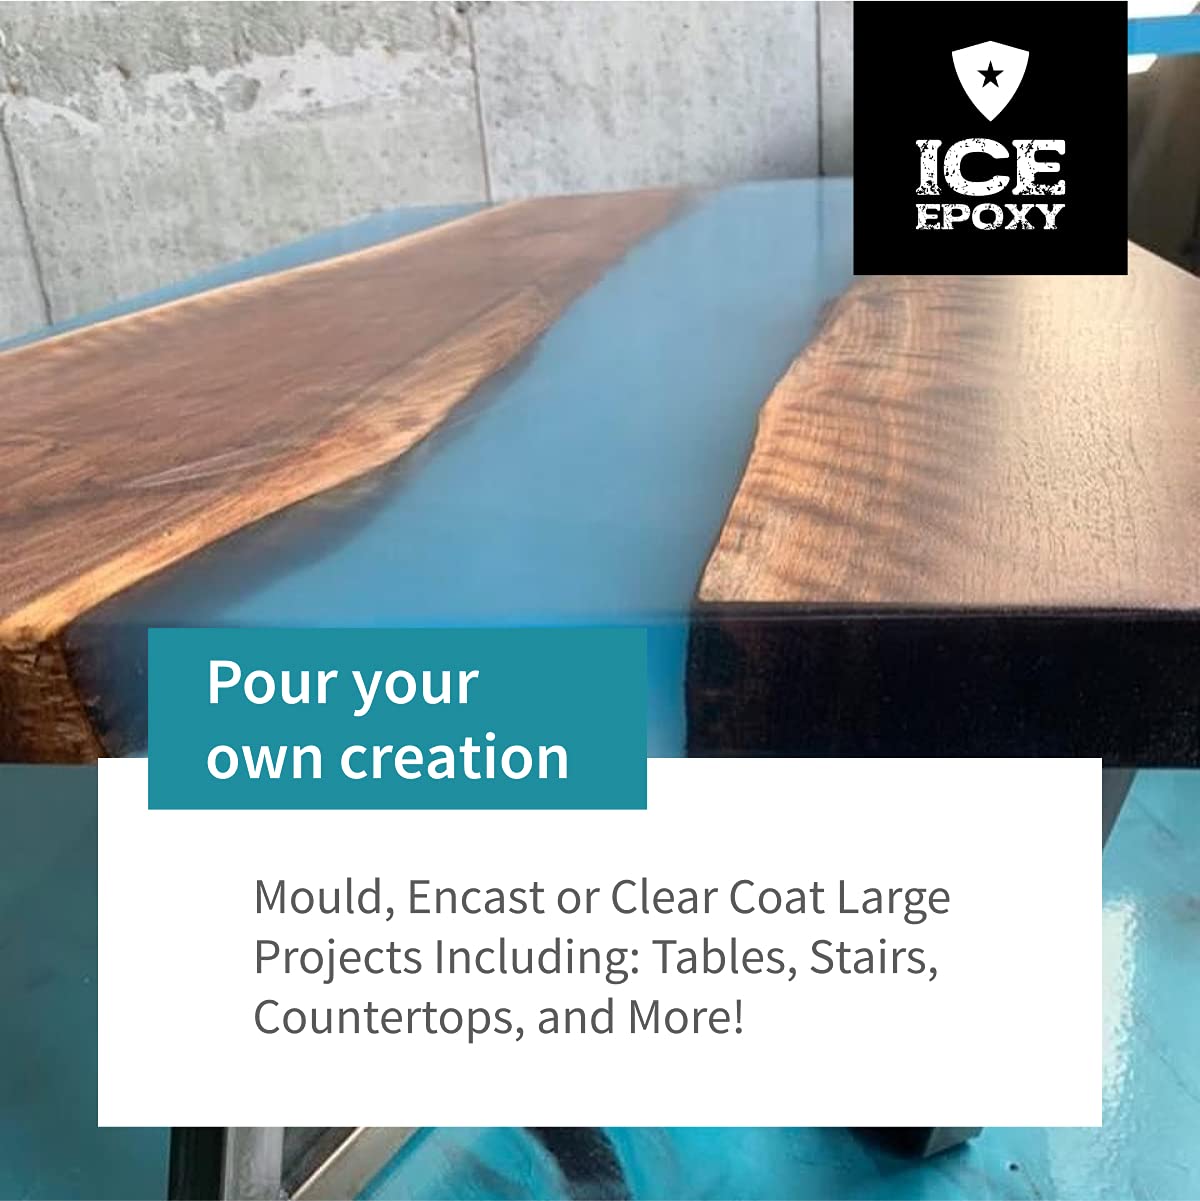 ICE EPOXY IceCast Deep Resin Epoxy | Crystal Clear | High Gloss Clear Shine | Ideal for 1-4 inches Deep Projects - Deep Pour Epoxy, River Tables & Castings | 2 Part 3 Gallon Resin Kit 2:1 Ratio